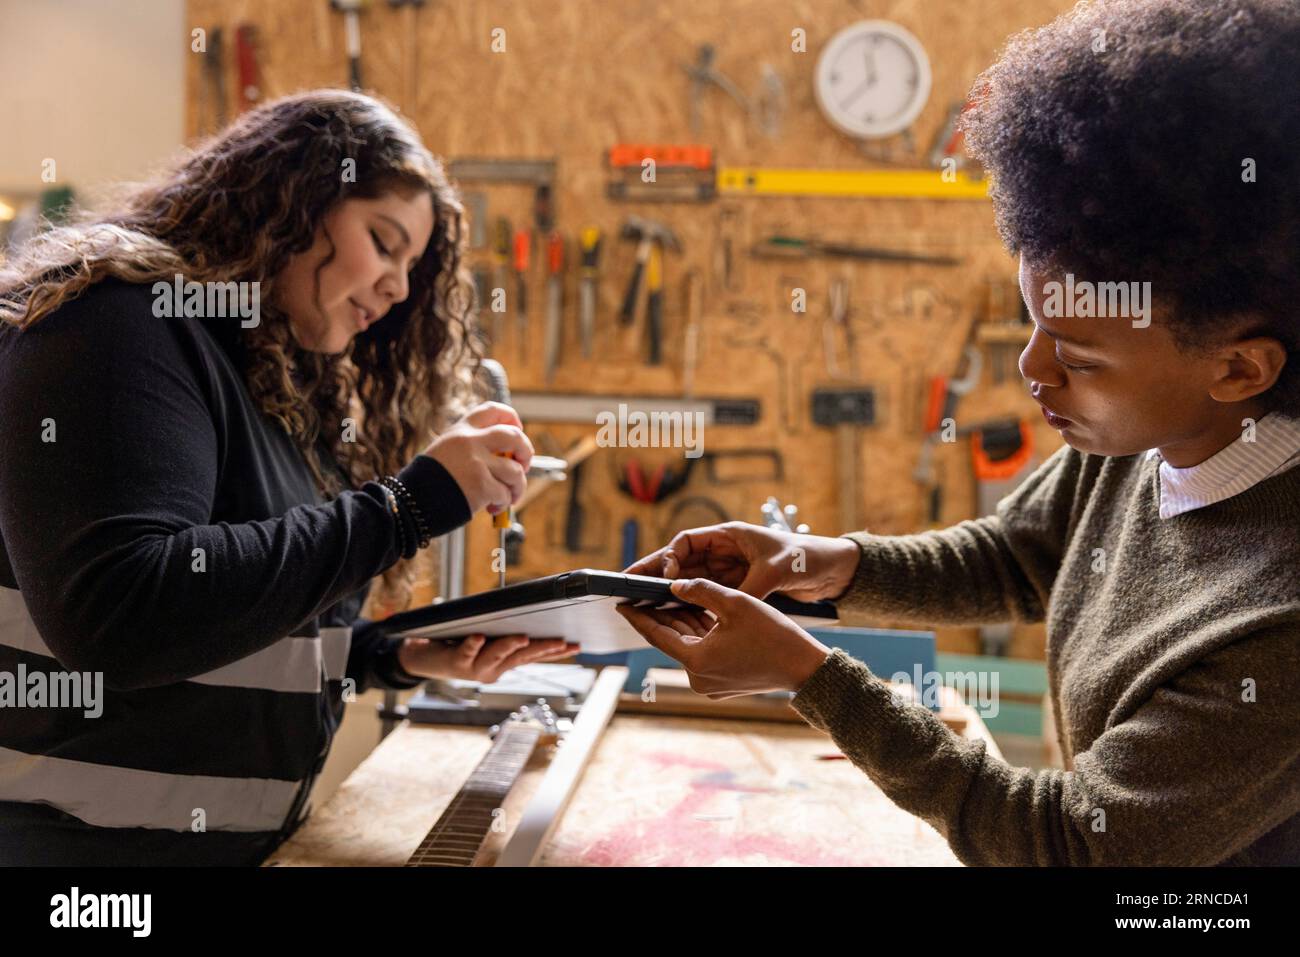 Woman helping technician repairing laptop using tool at recycling center Stock Photo